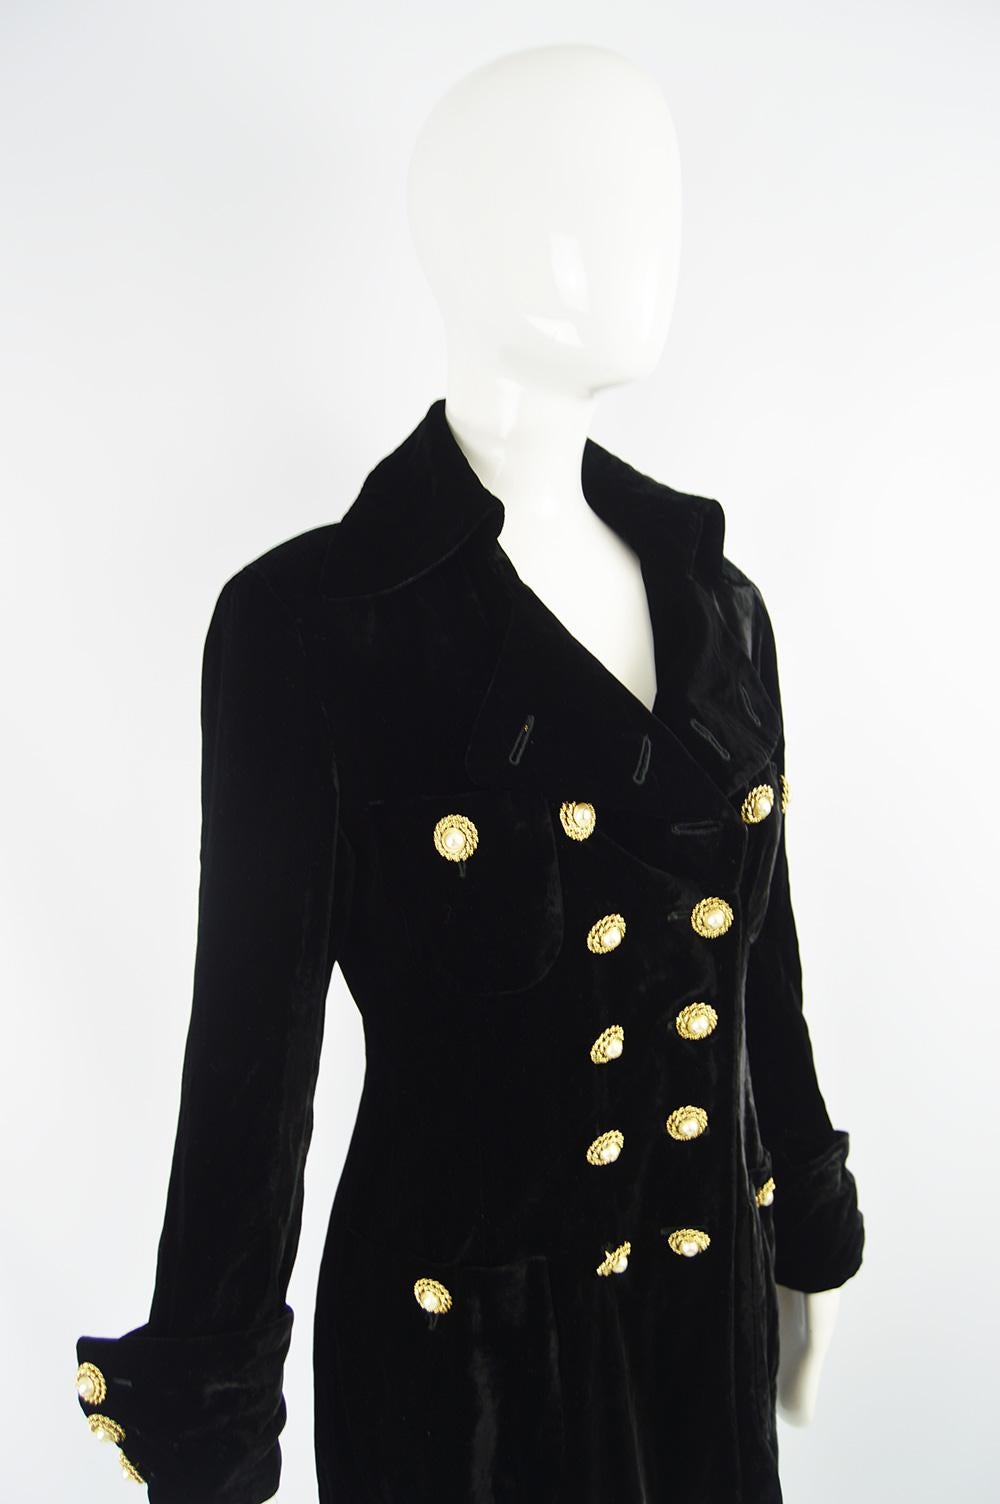 Moschino Couture Vintage Black Velvet Jacket with Ornate Smiley Buttons, 1990s 3